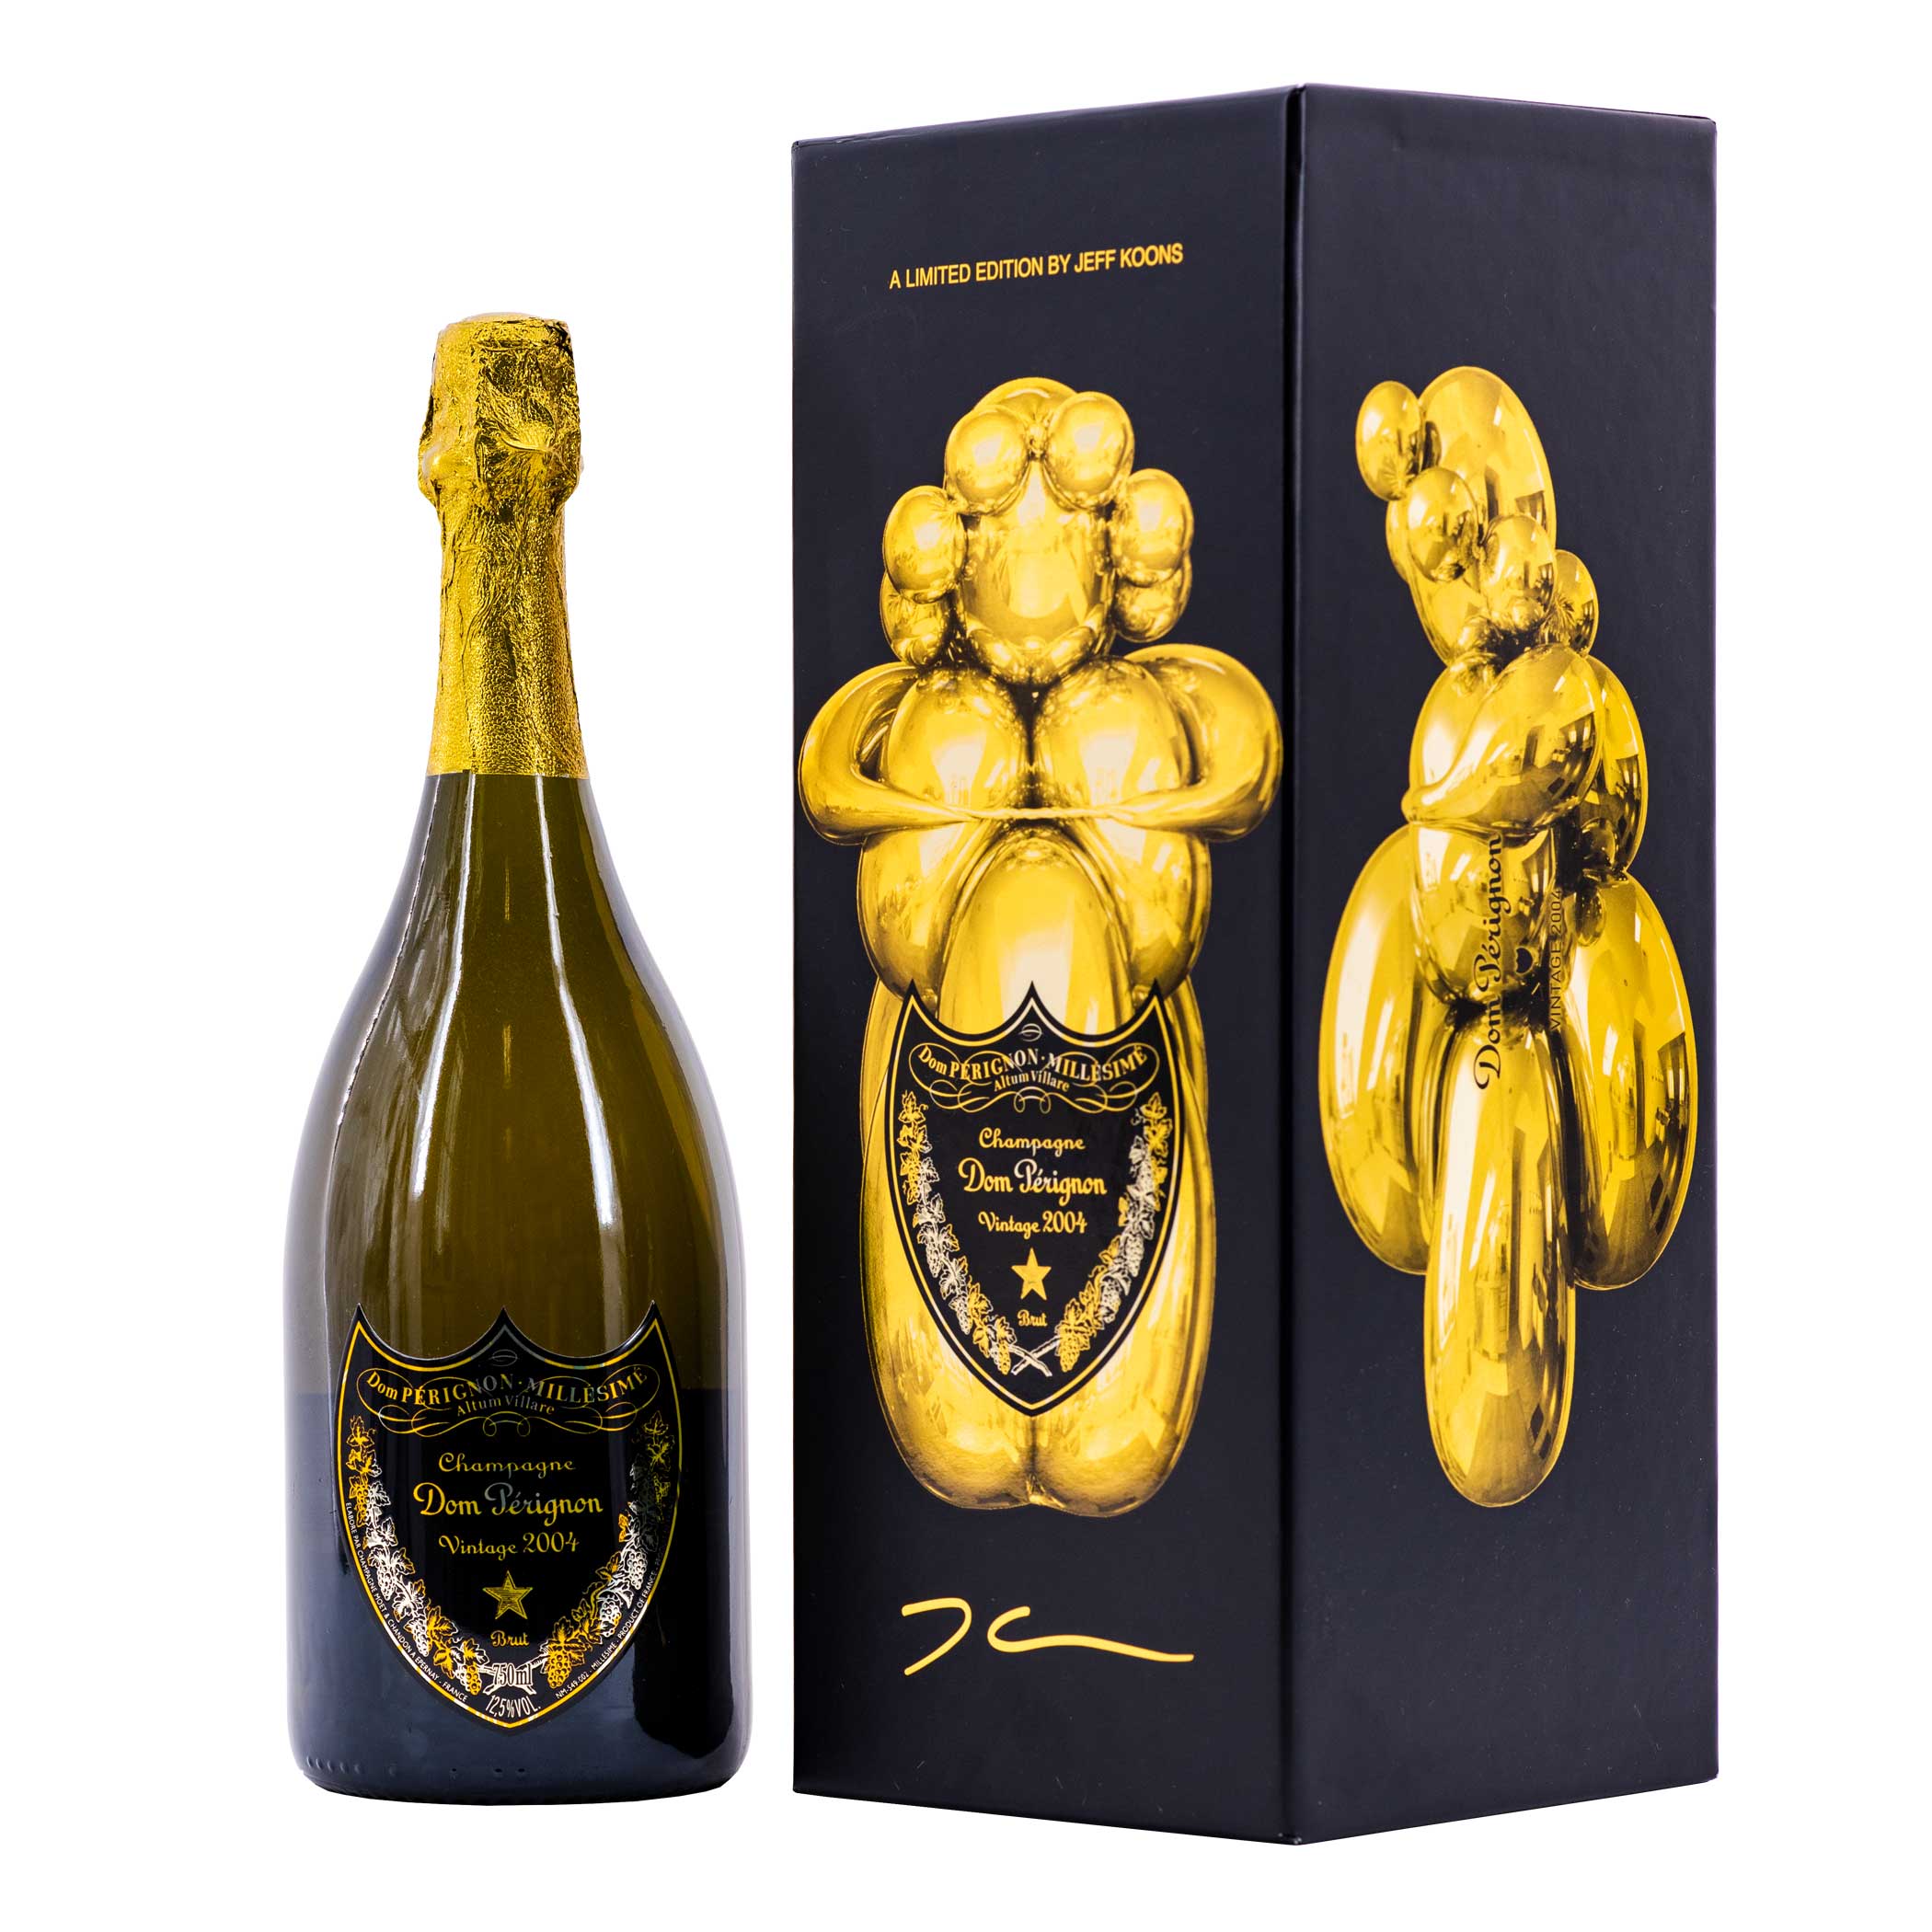 Champagne as Art - Ultimate Gifting: 2004 Dom Perignon Jeff Koons